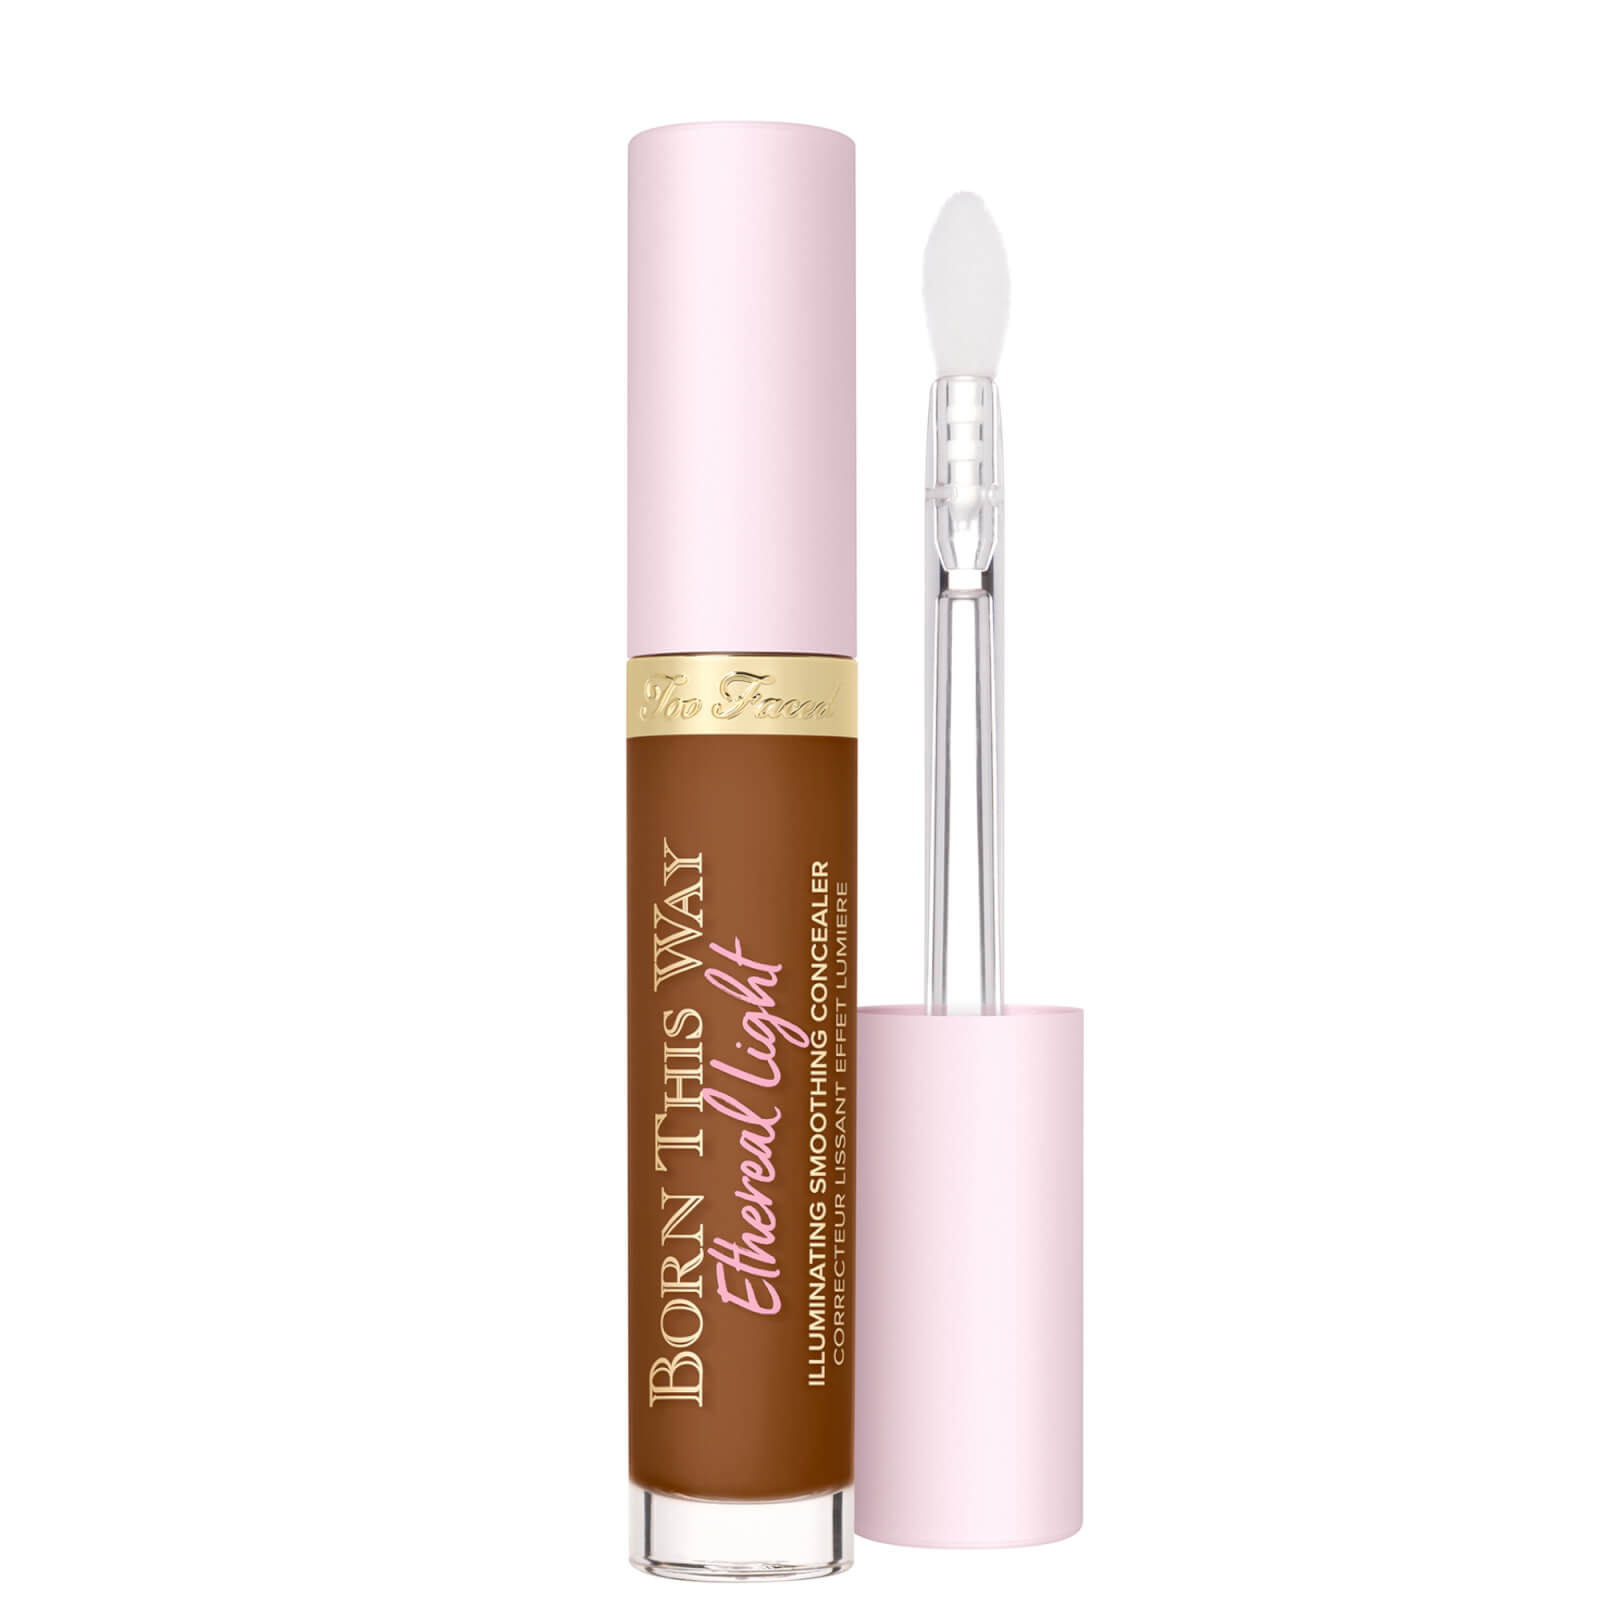 Too Faced Born This Way Ethereal Light Illuminating Smoothing Concealer 15ml (Various Shades) - Hot 